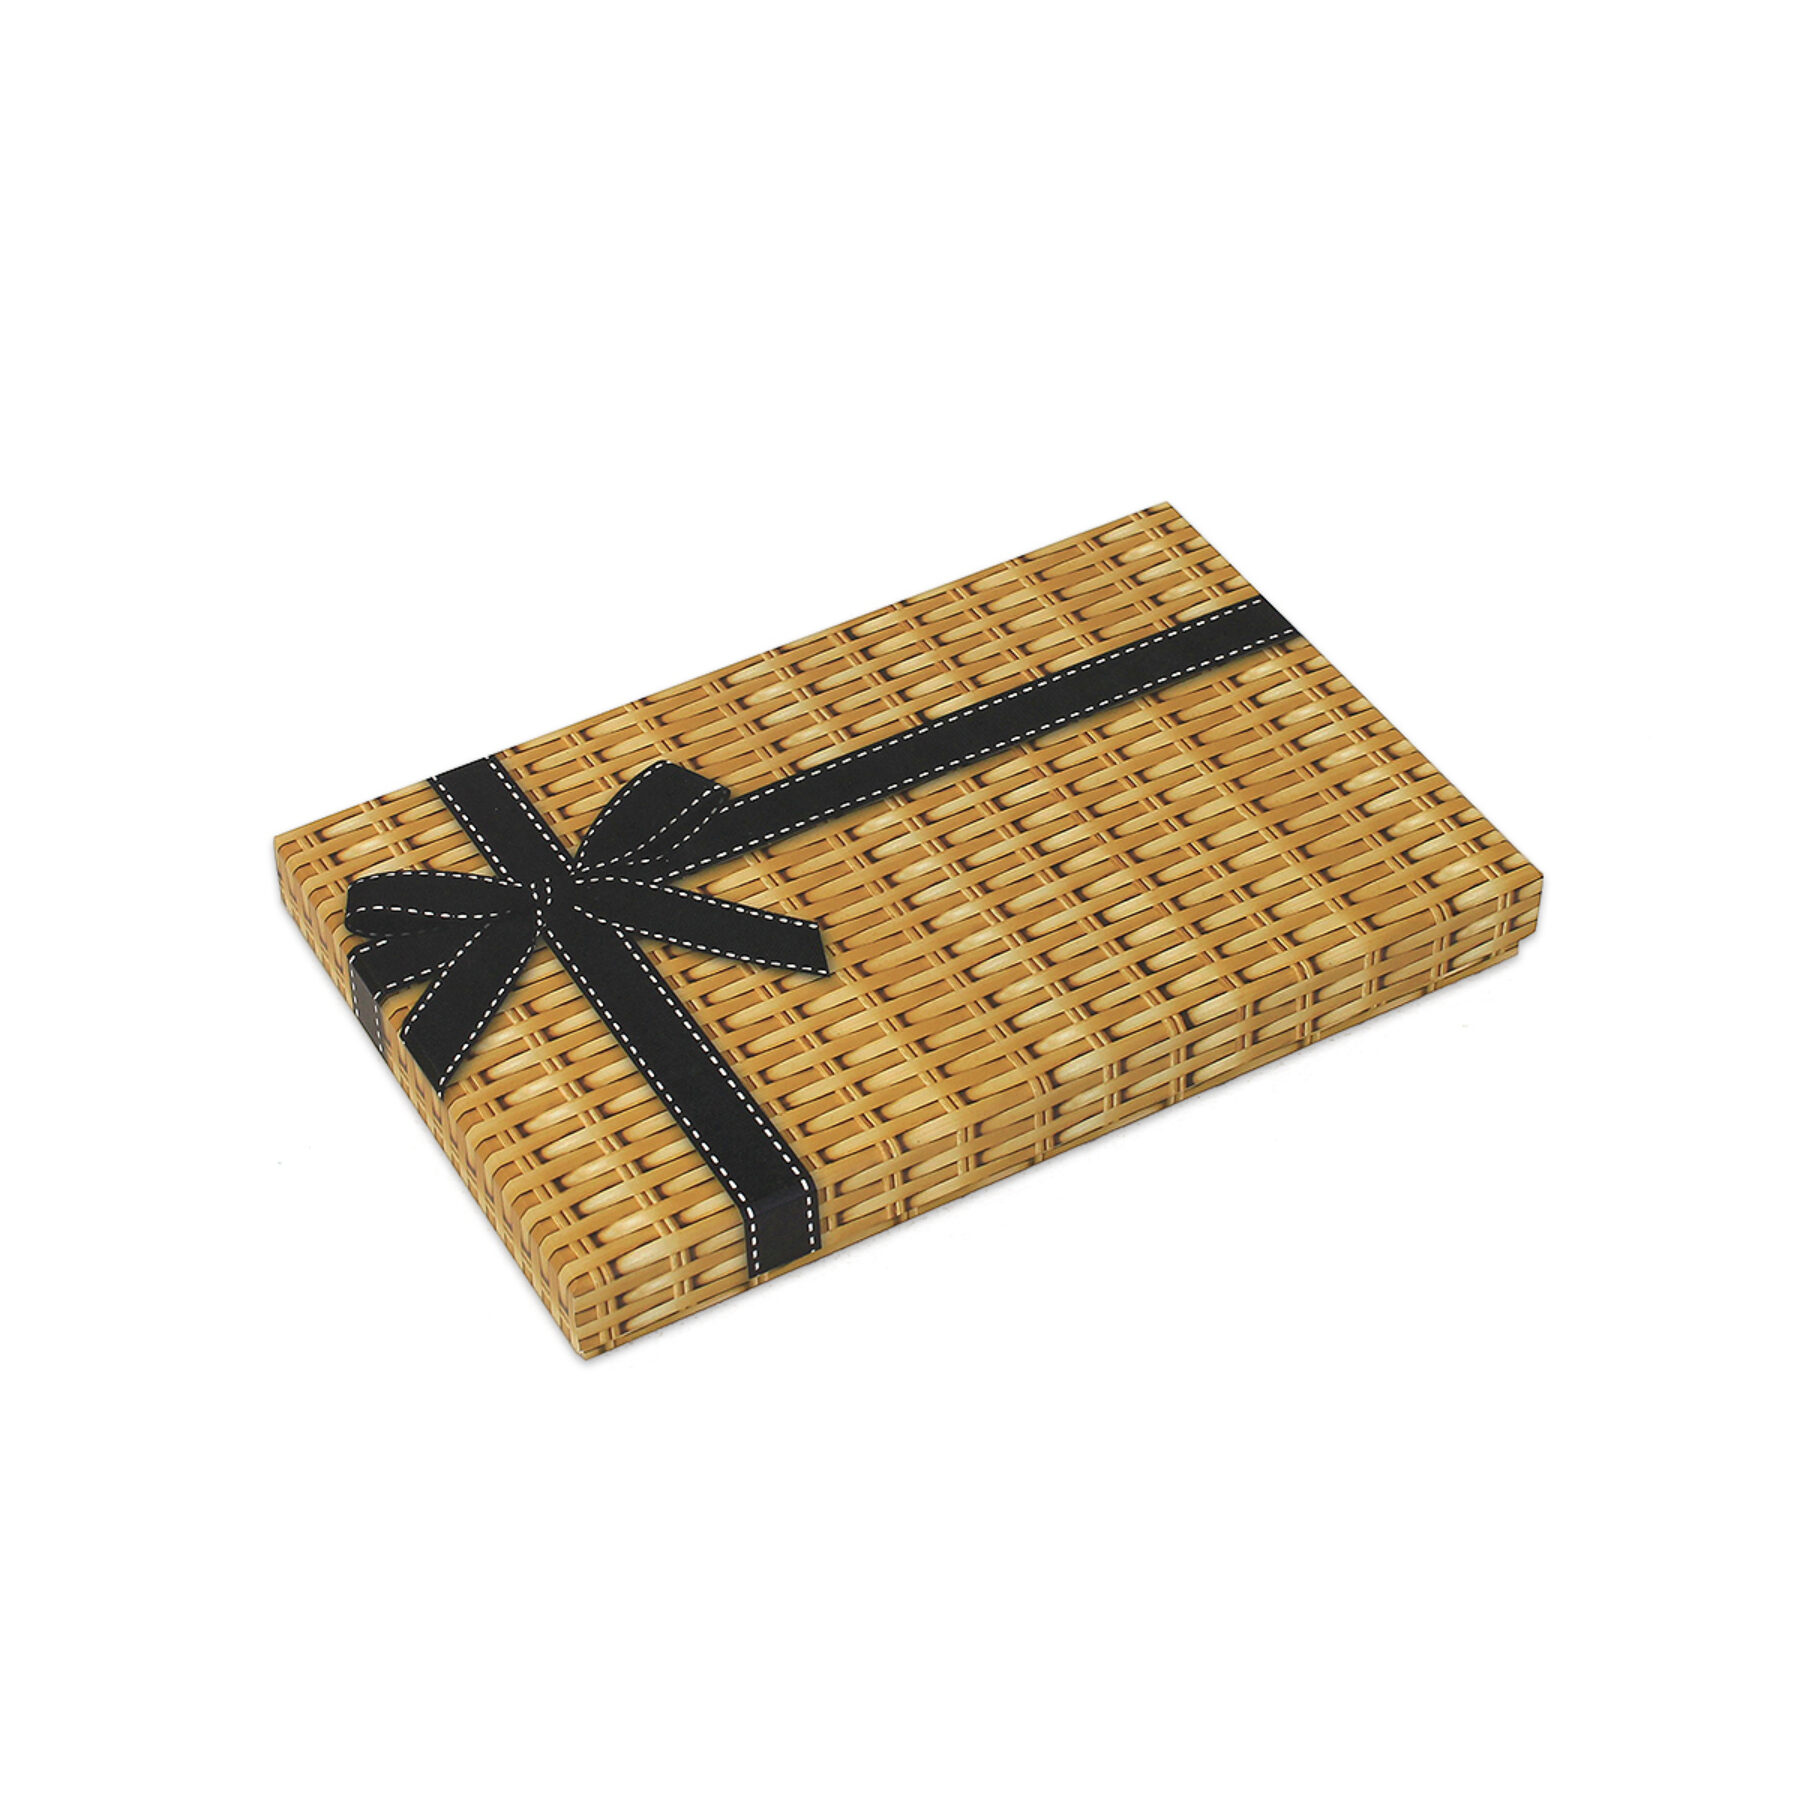 12 Letterbox Gift Boxes - Wicker Print